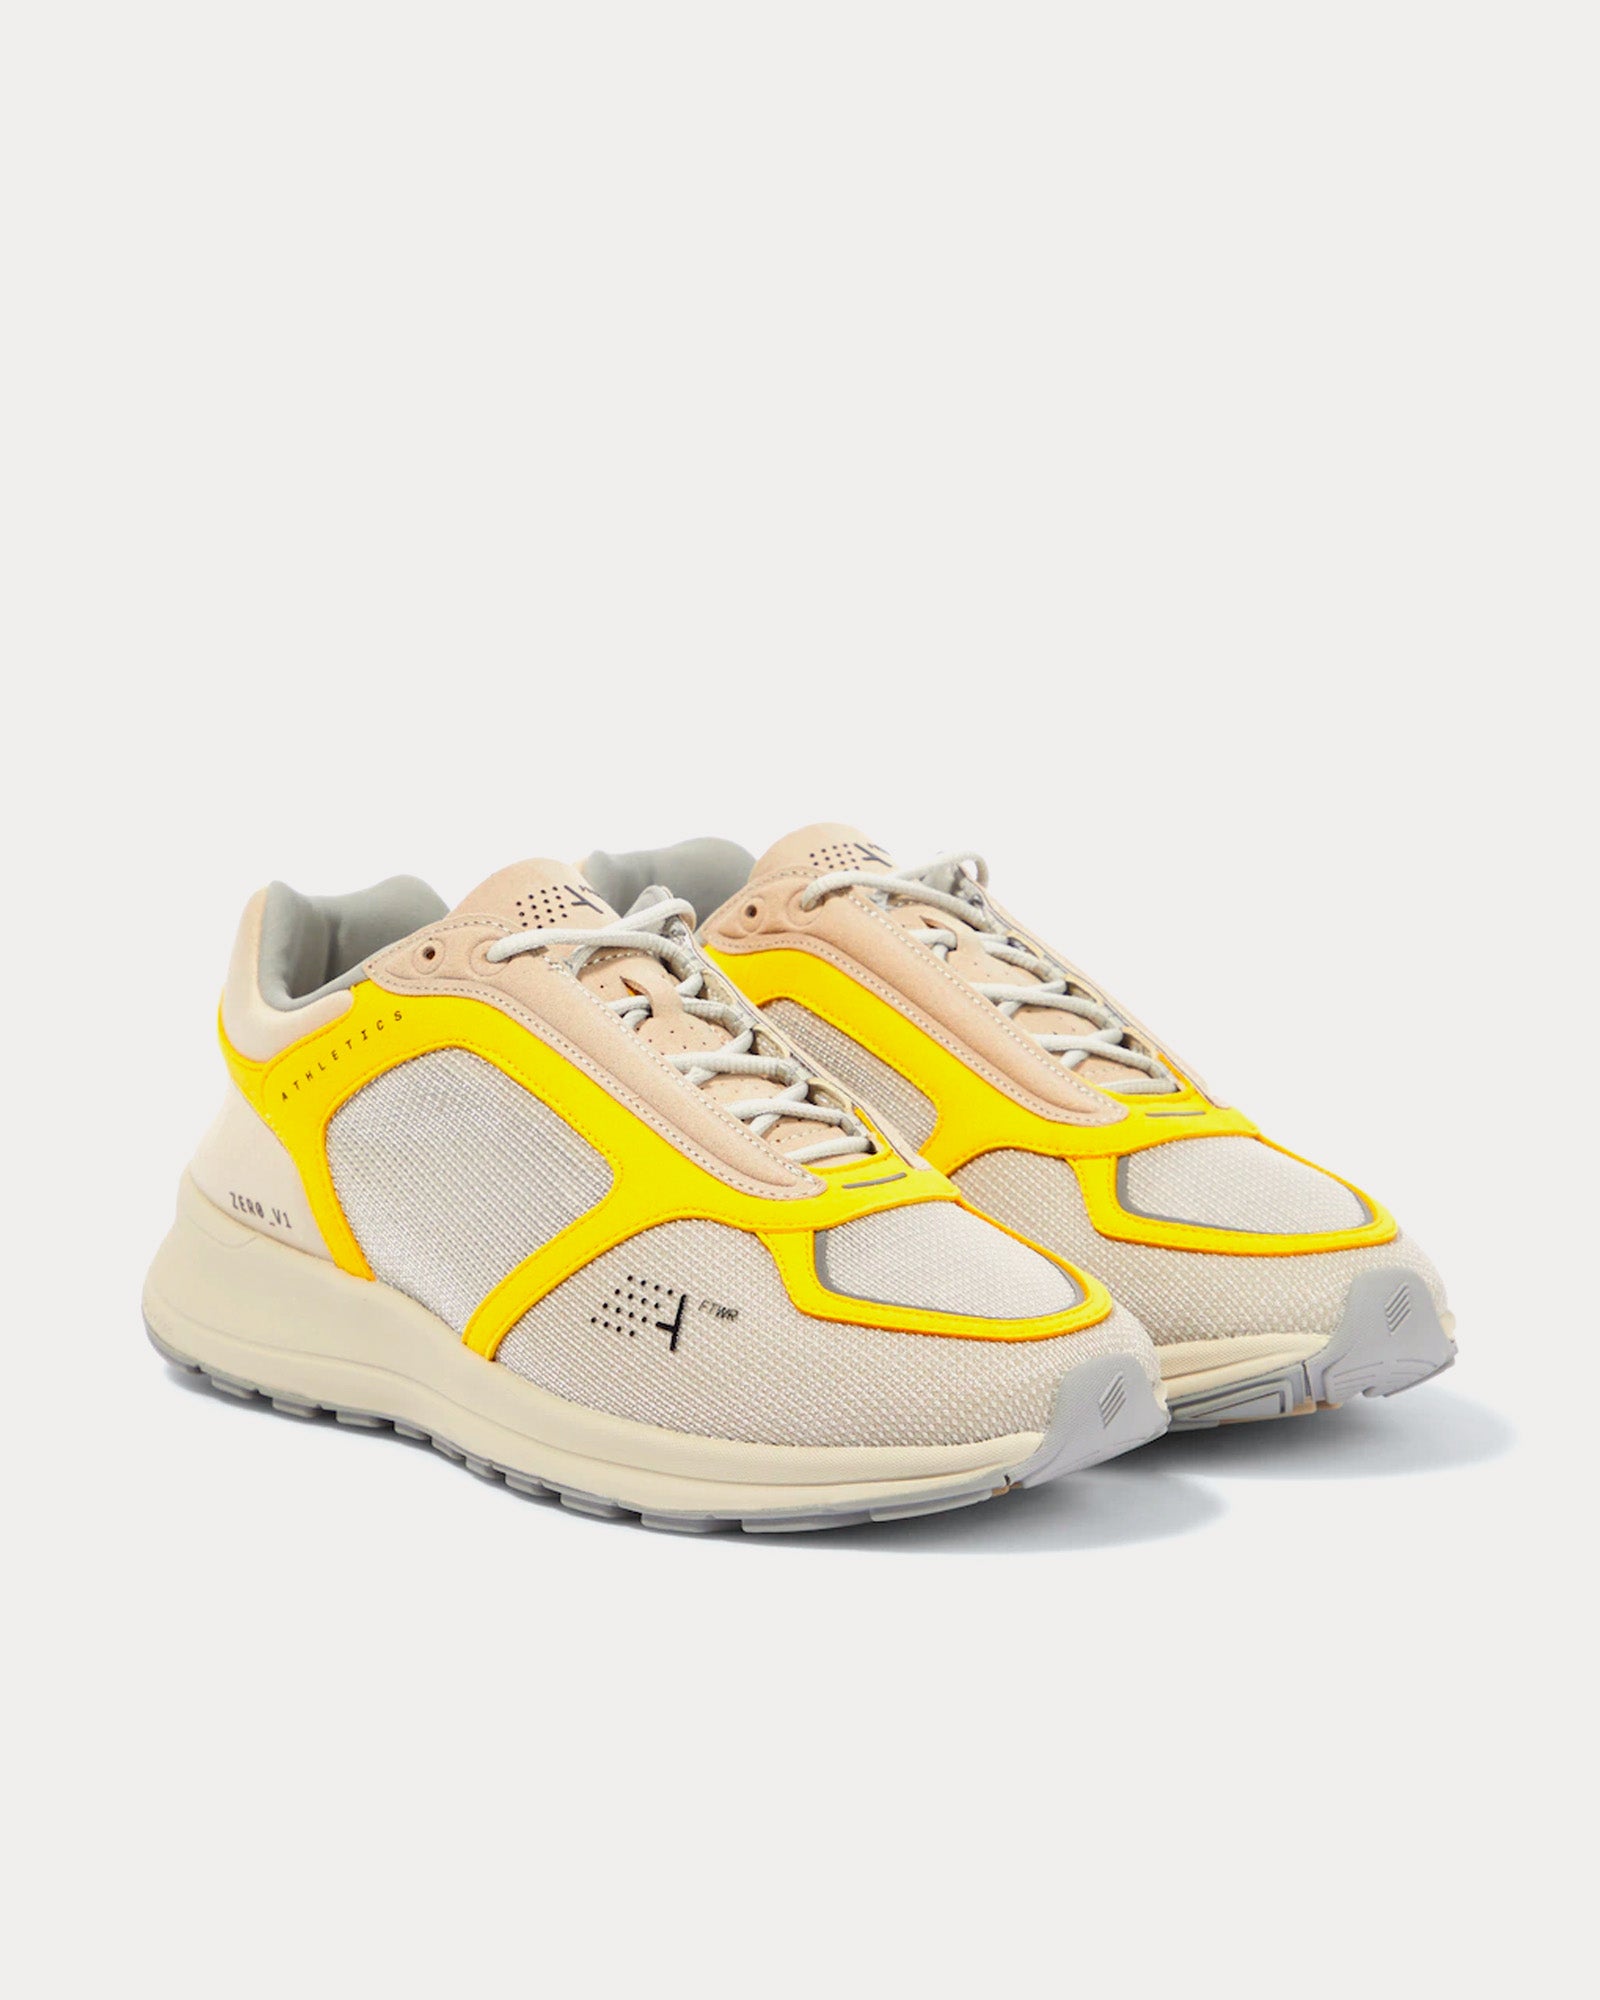 Athletics FTWR - Zero V1 Silver Lining / Yellow Low Top Sneakers